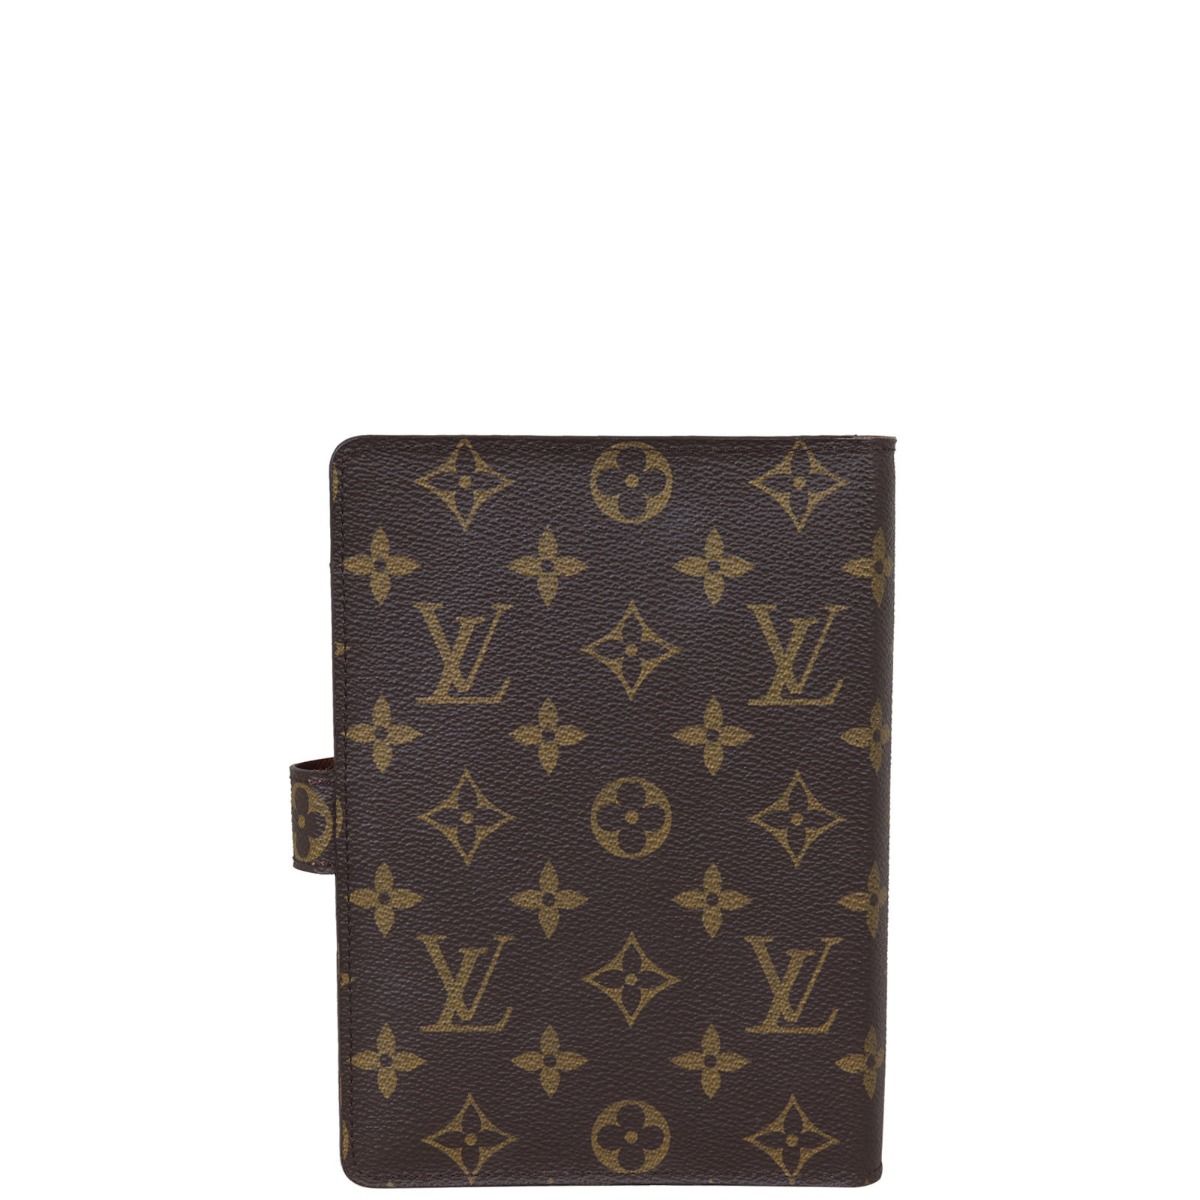 Shop Louis Vuitton Large ring agenda cover R20107 R20106 by  MarukoBranche  BUYMA